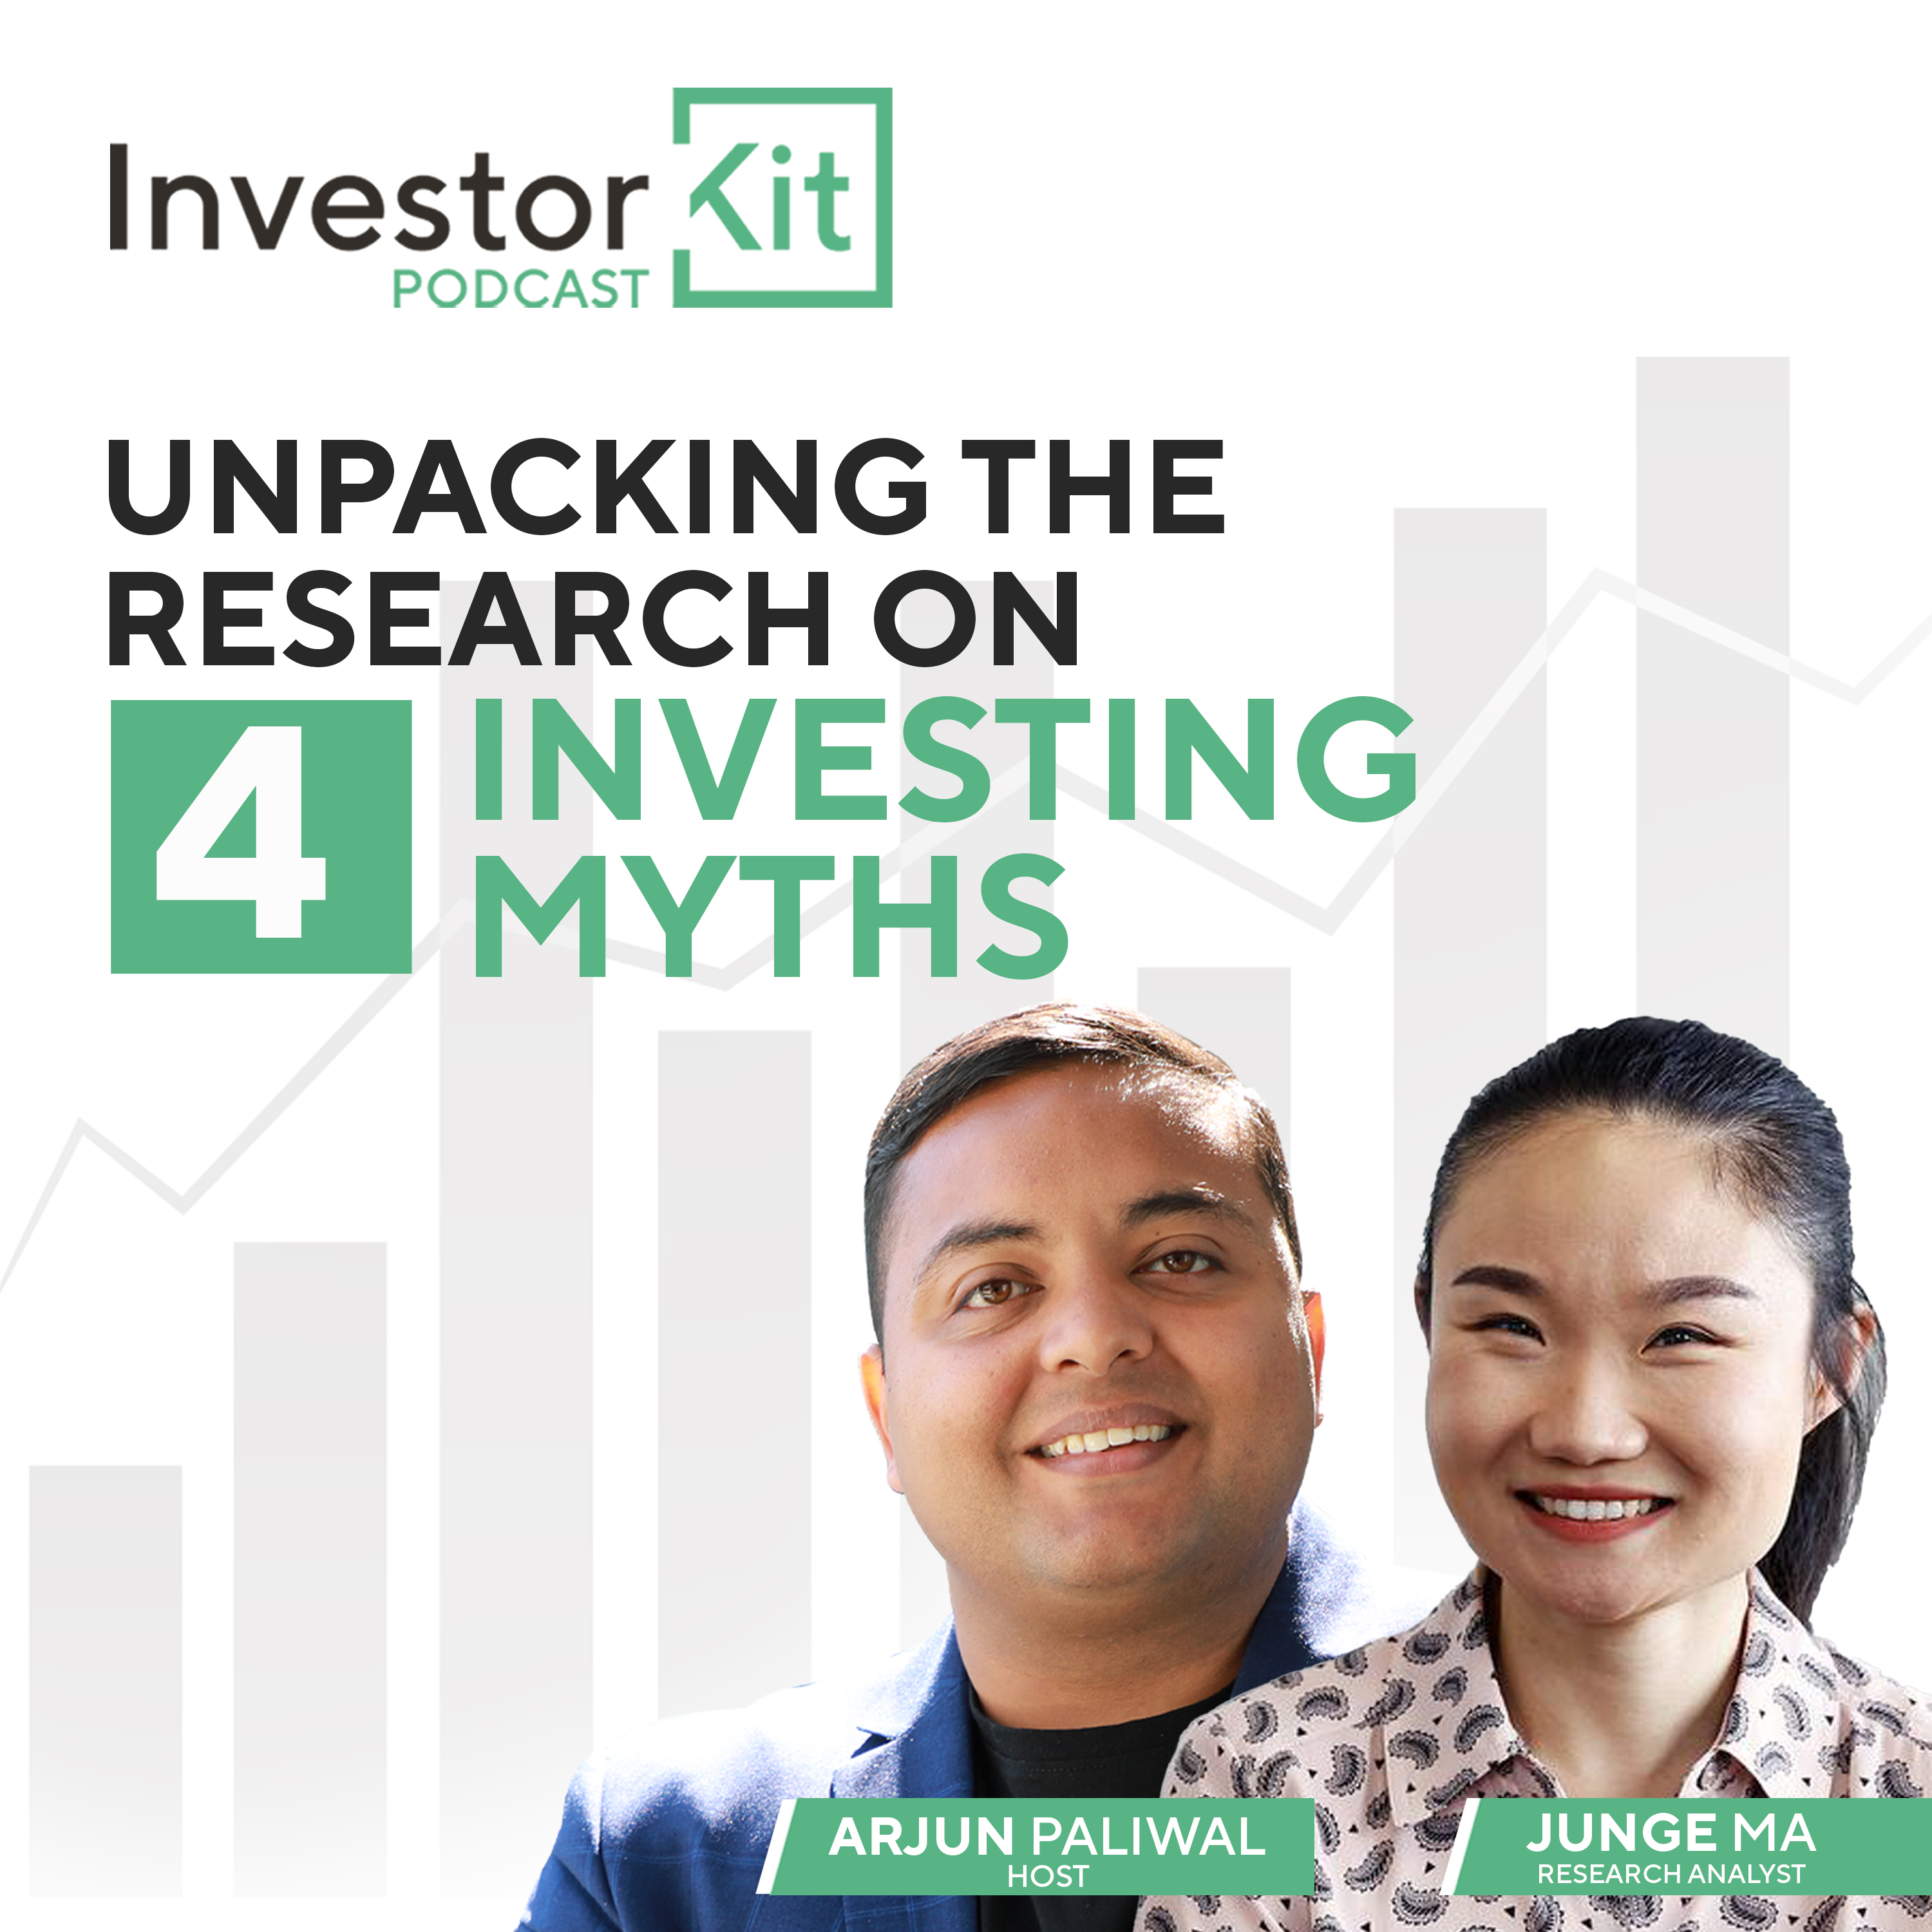 Unpacking The Research On 4 Investing Myths